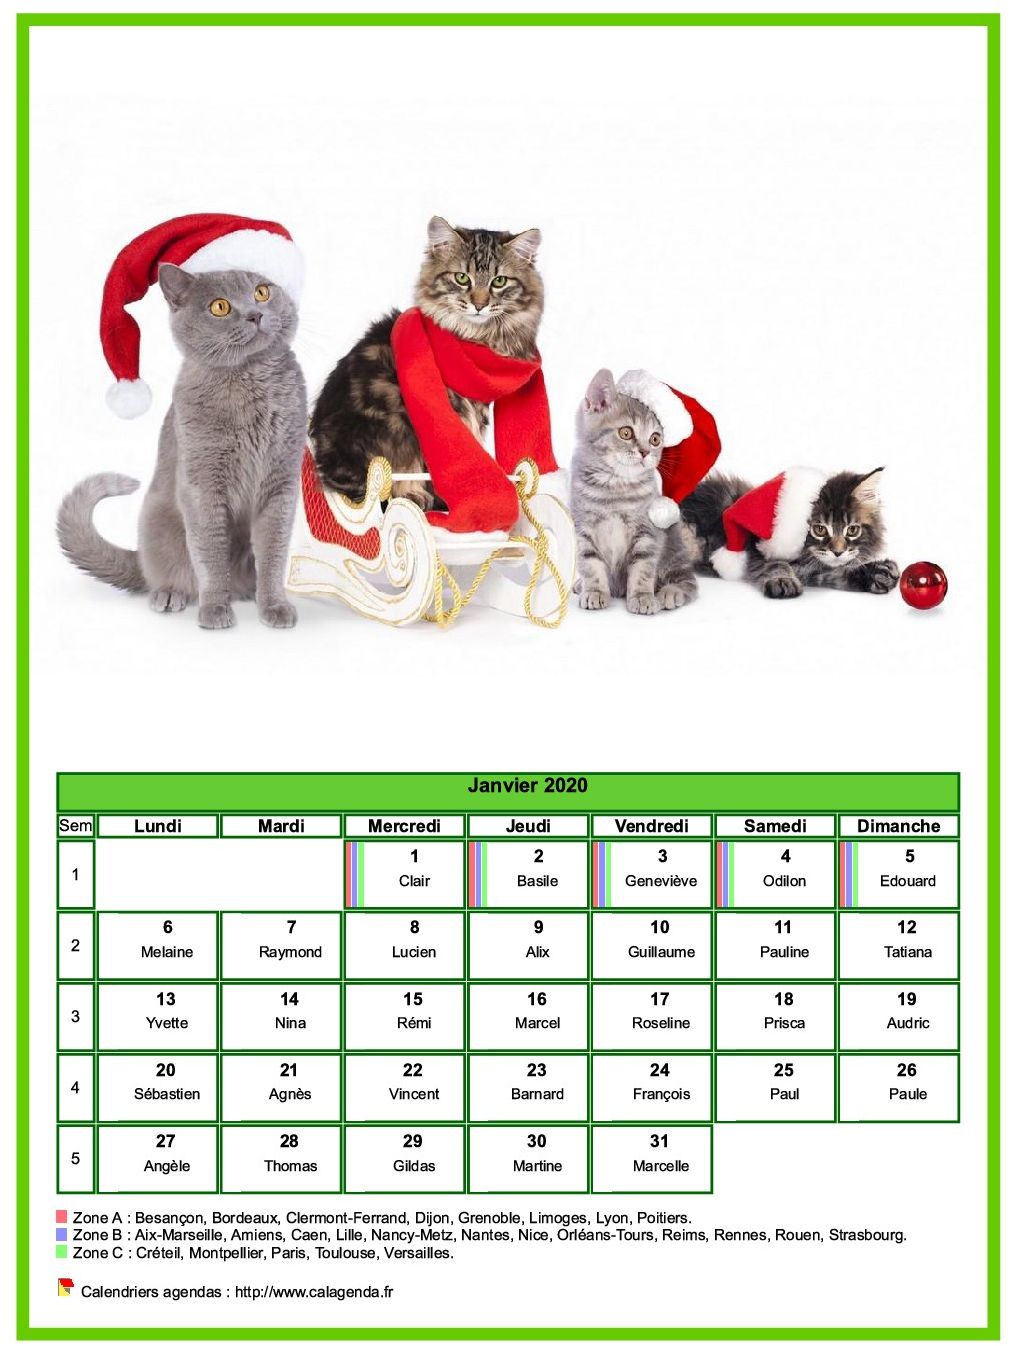 Calendrier janvier 2020 chats